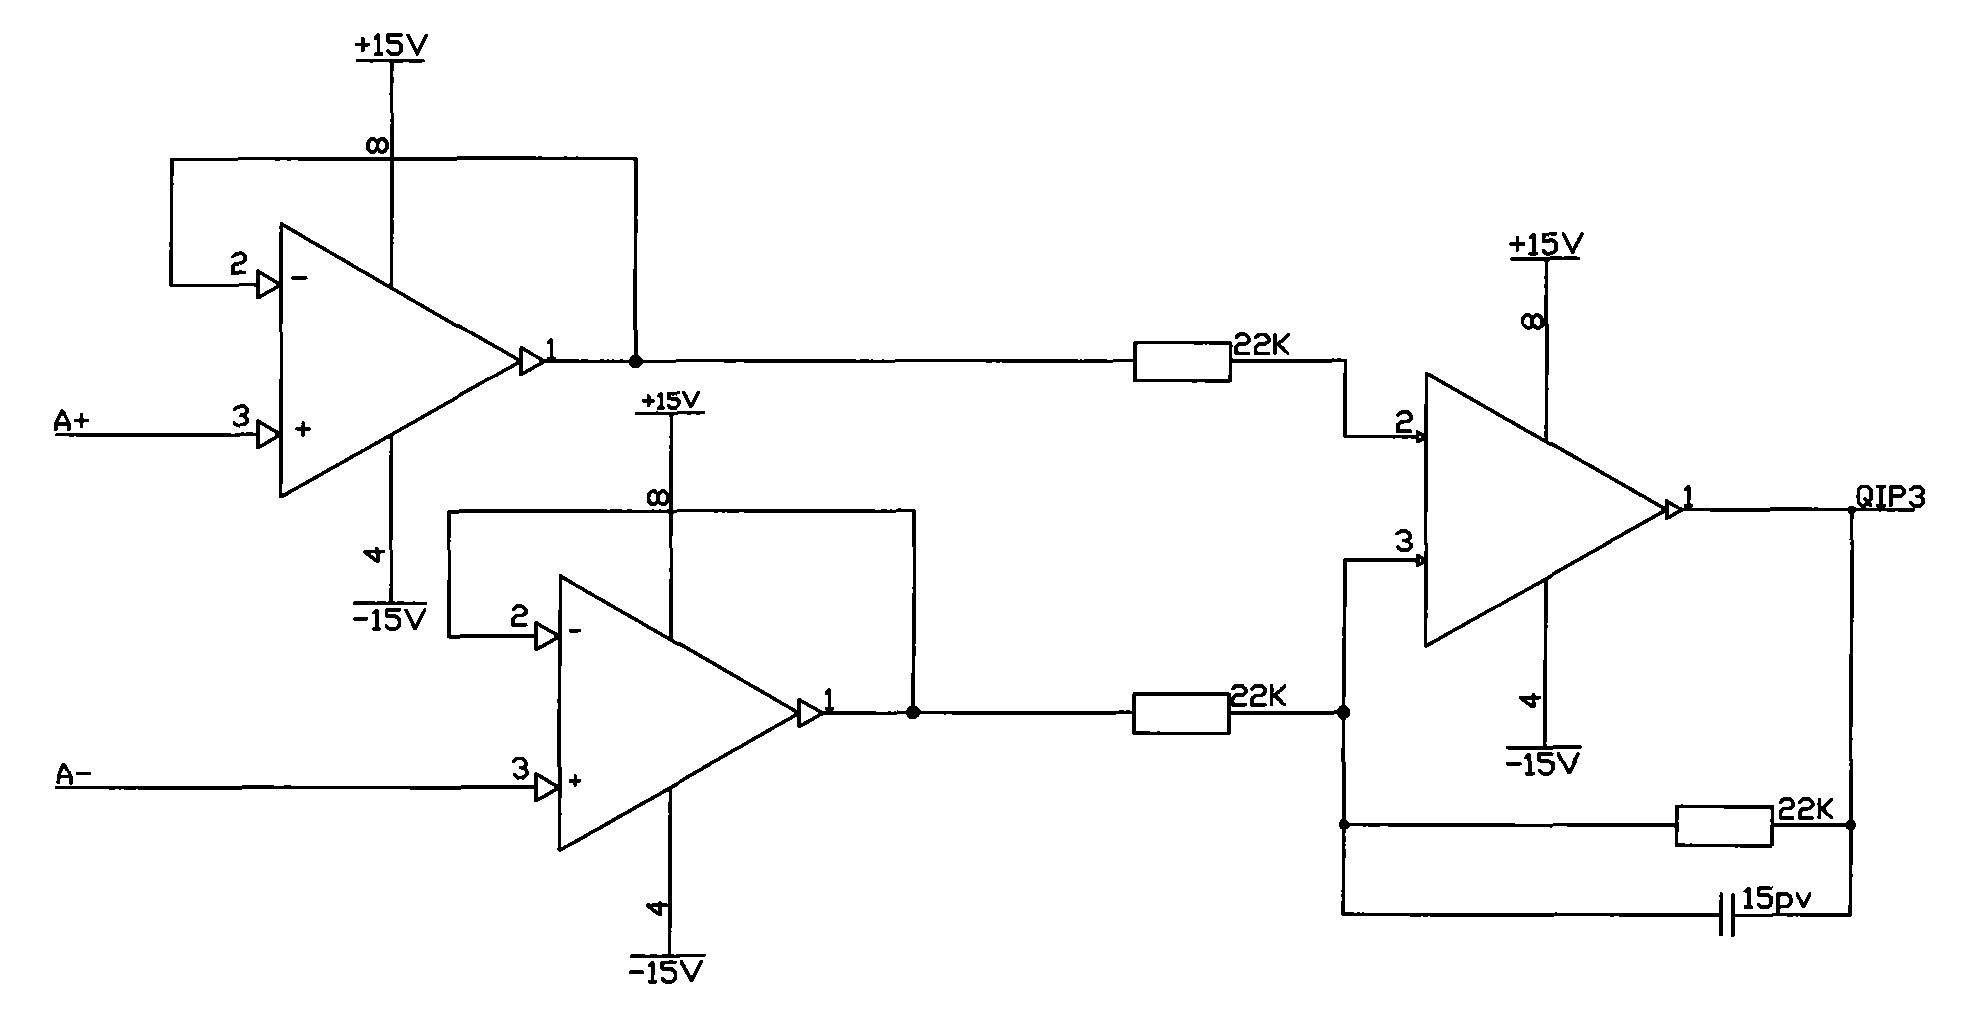 Alternating current permanent-magnet synchronous machine controller